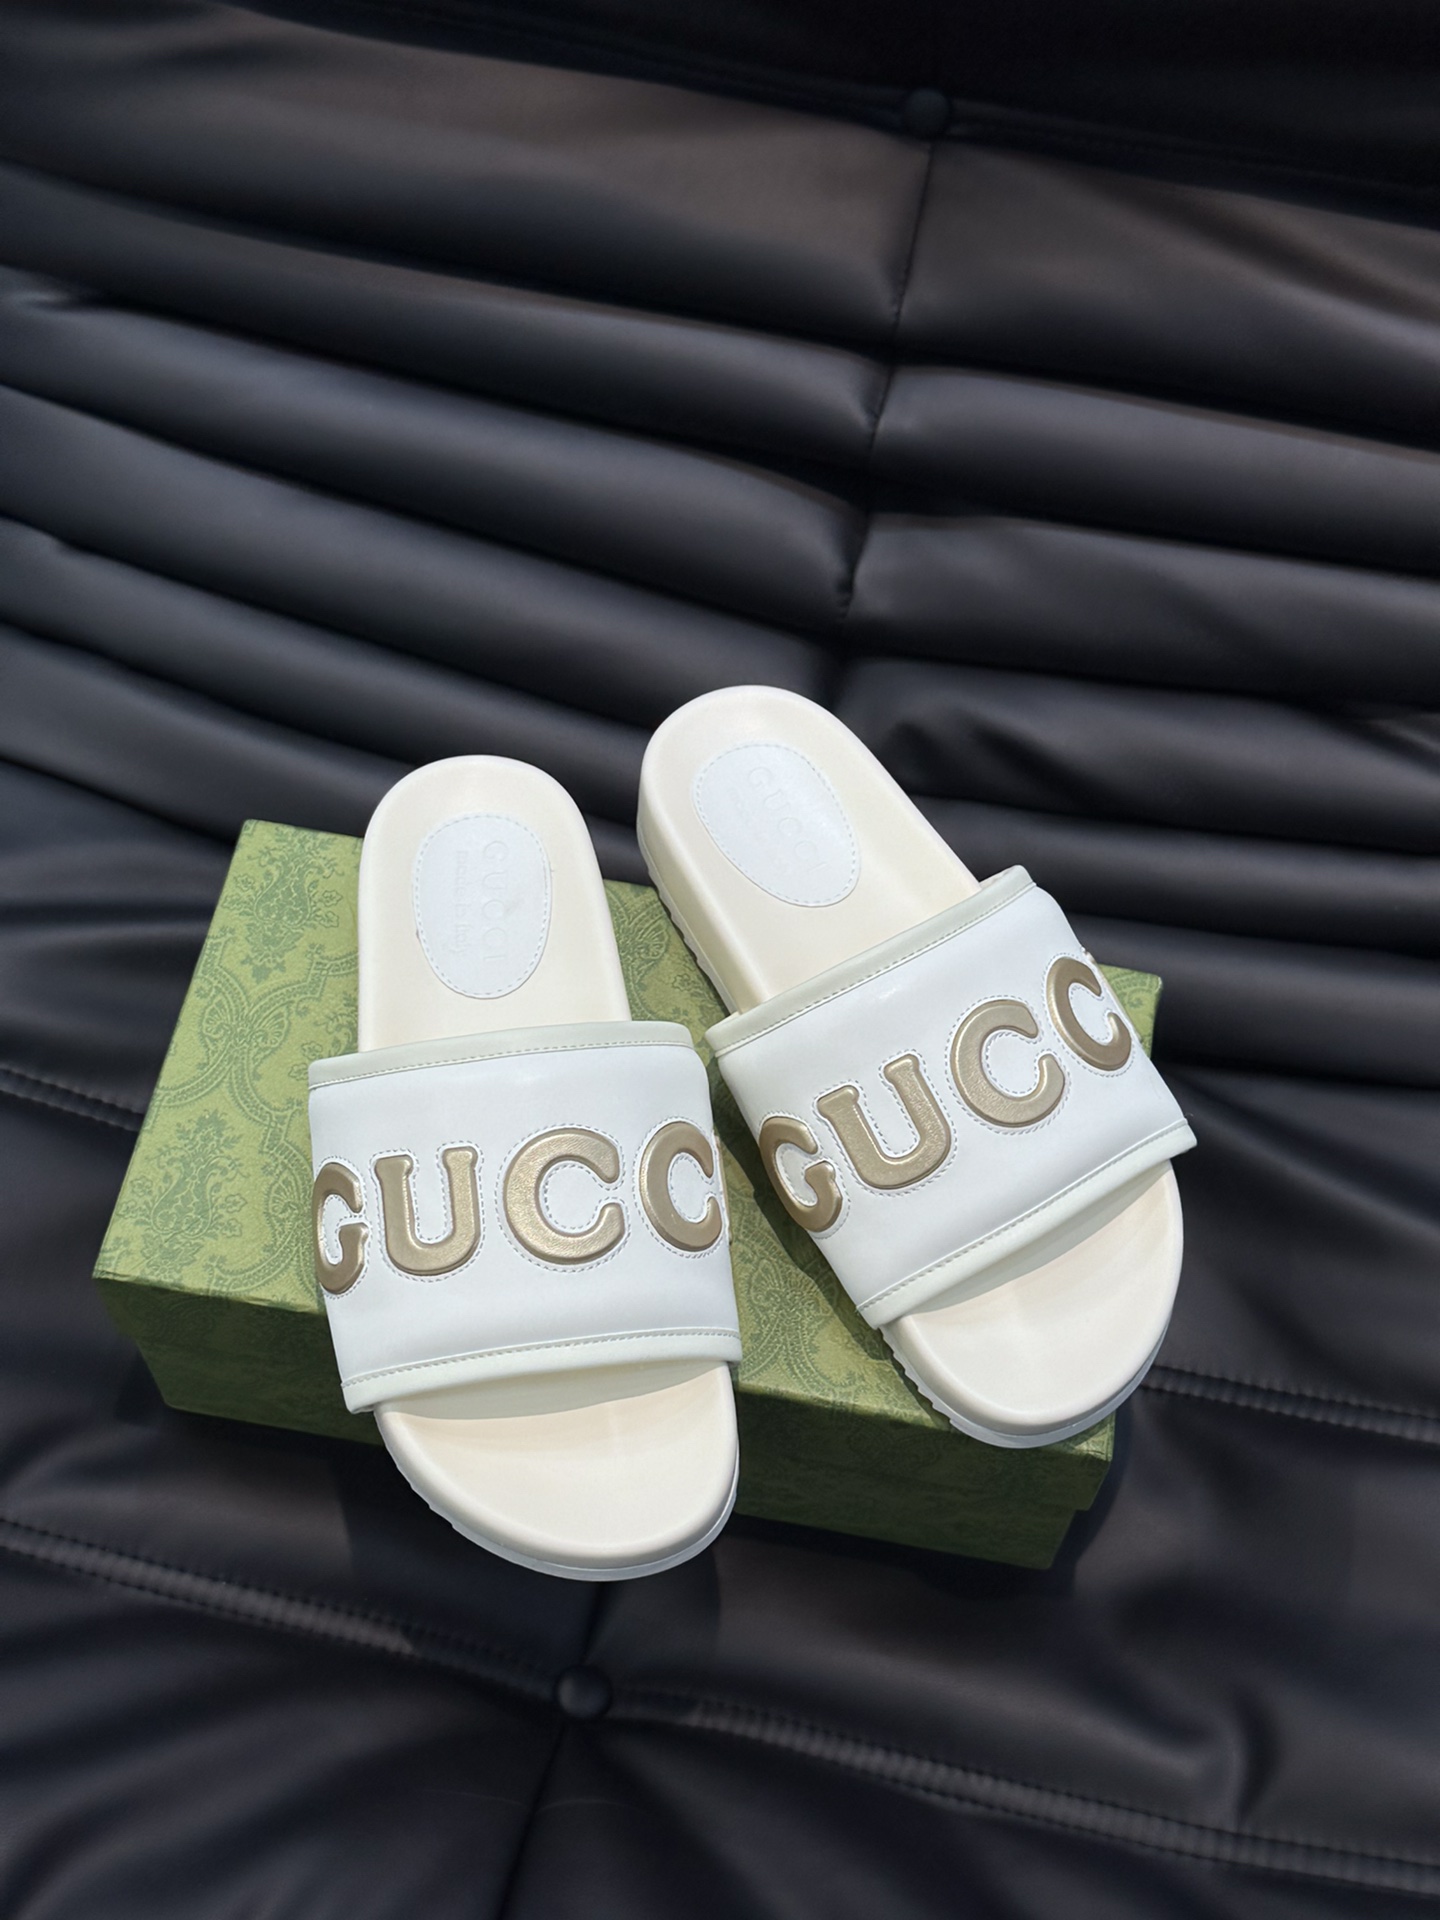 Gucci Cheap
 Shoes Sandals Slippers Unisex Cowhide TPU Spring/Summer Collection Fashion